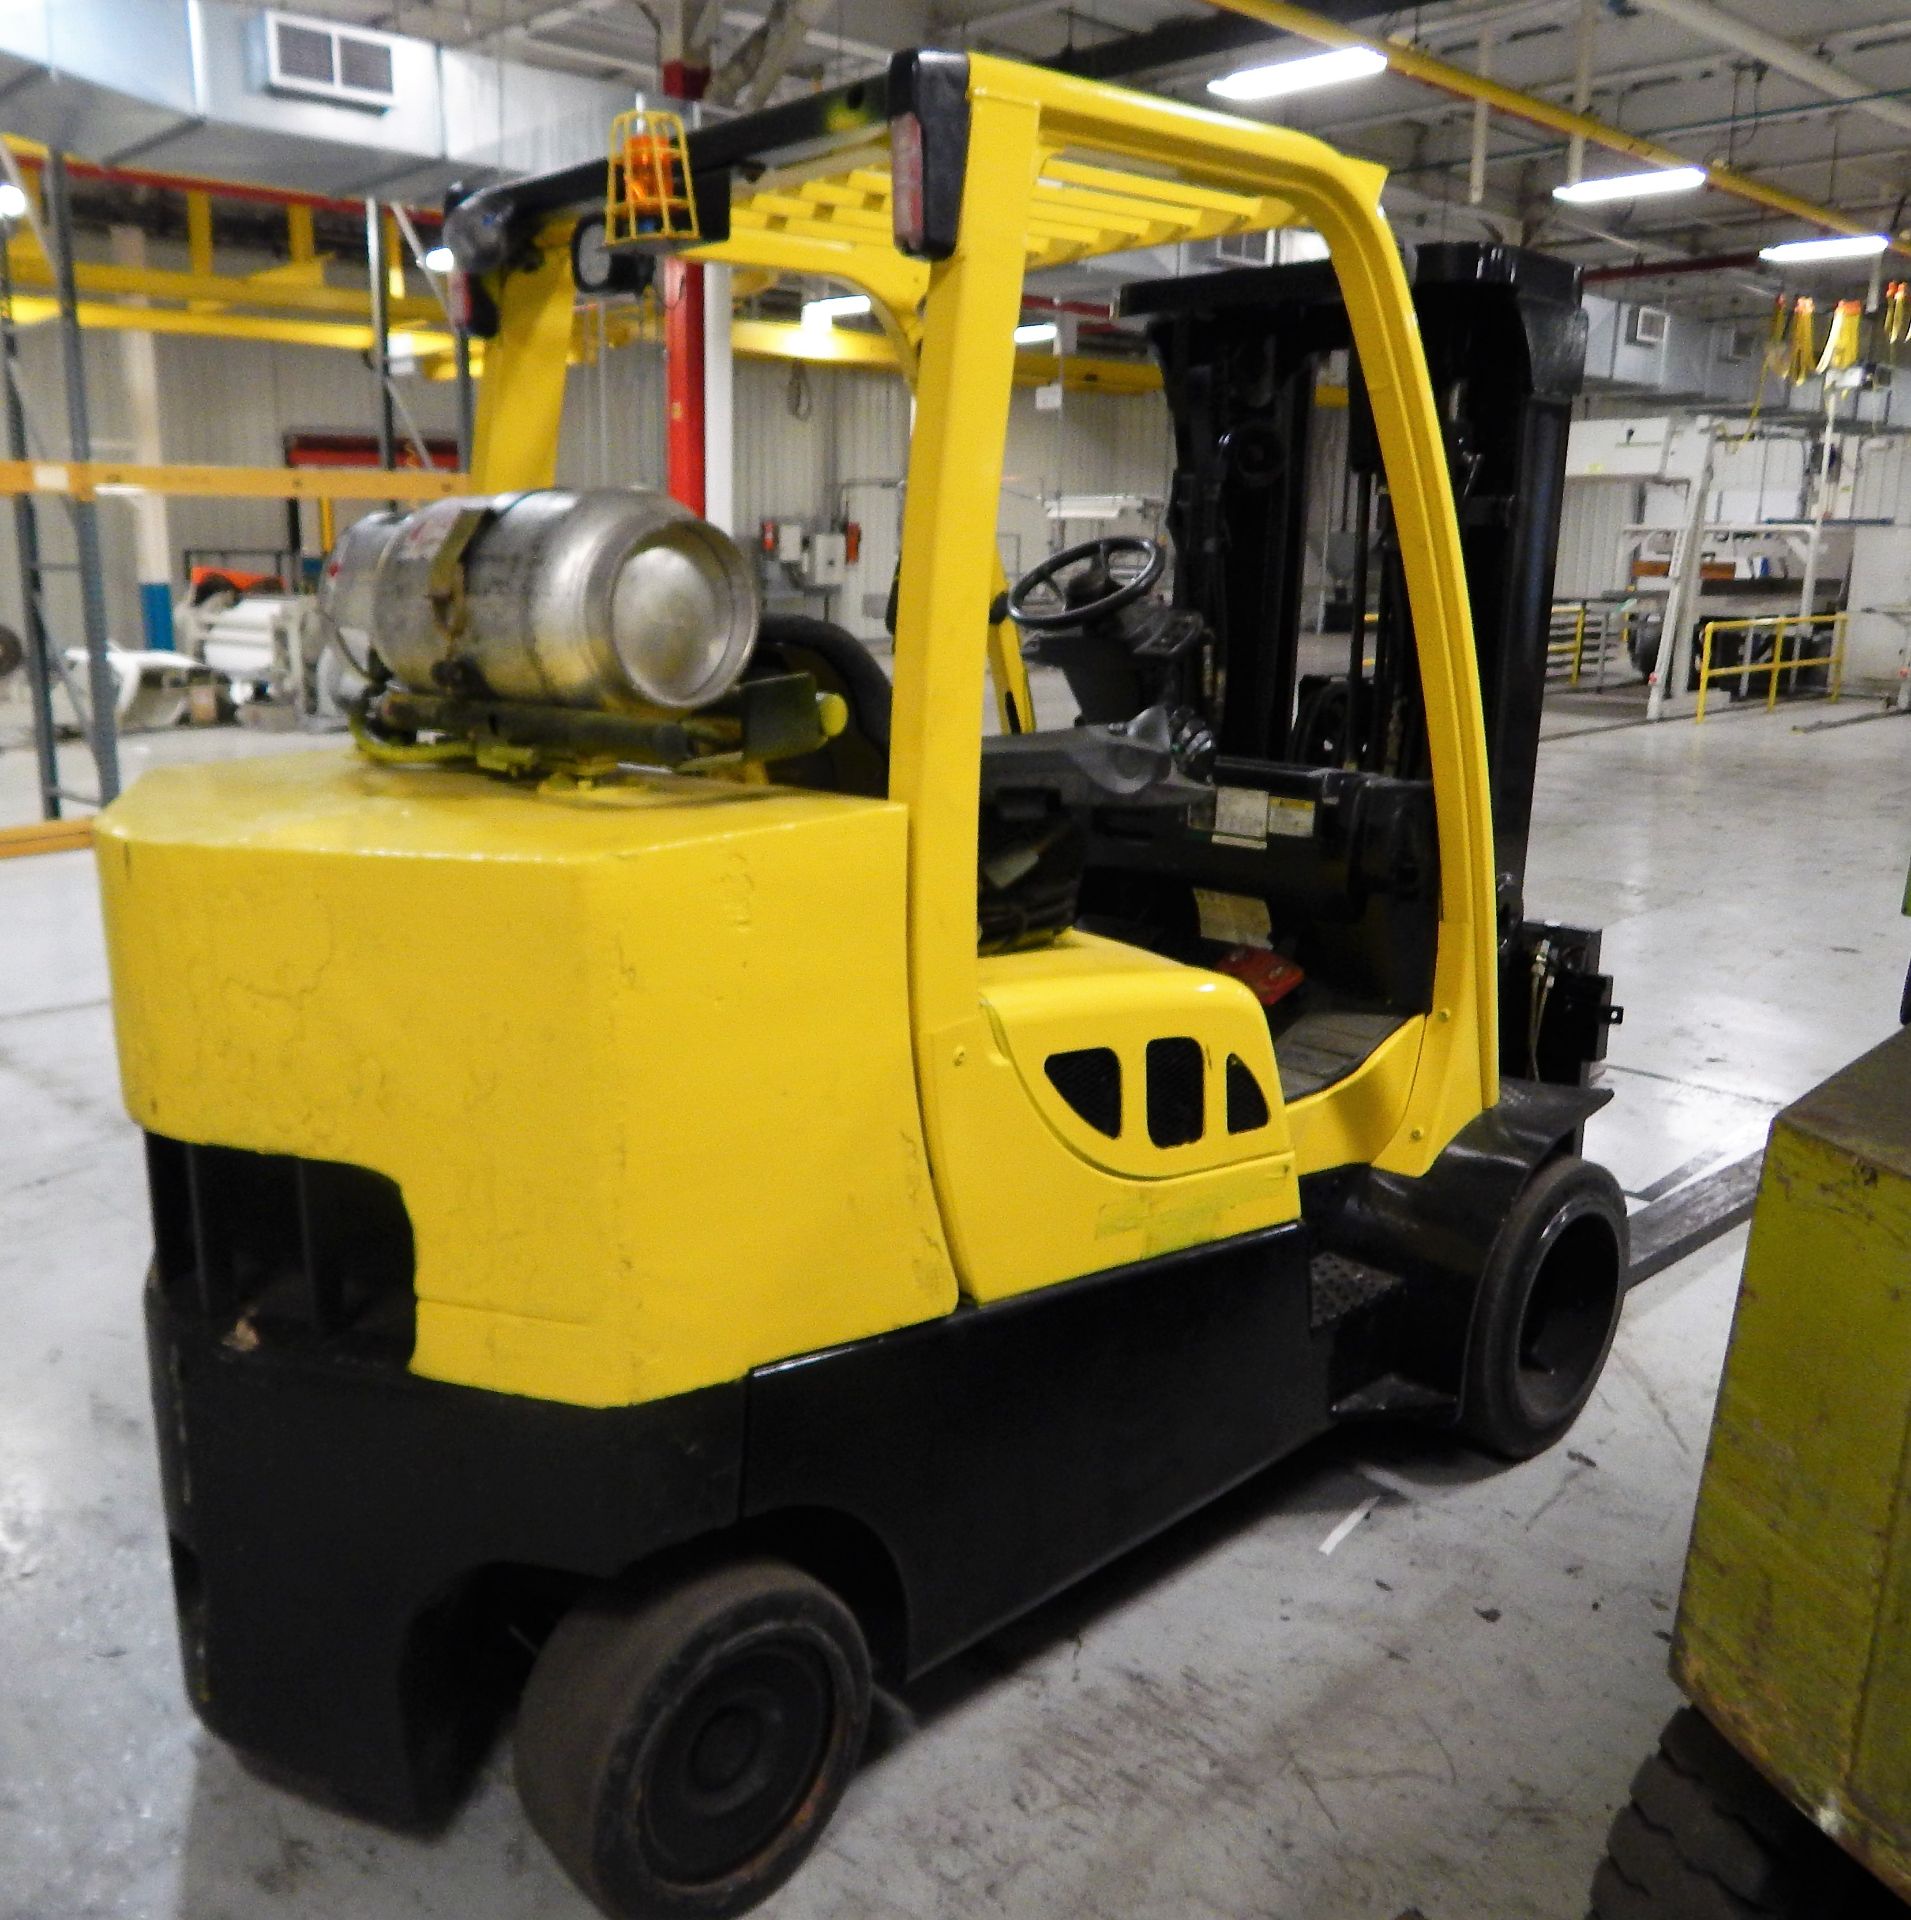 HYSTER MDL. S120FTPRS 12,000# CAPACITY FORKLIFT TRUCK, WITH 9515 HOURS, 4-WAY HYDRAULICS, 85'' - Image 3 of 4